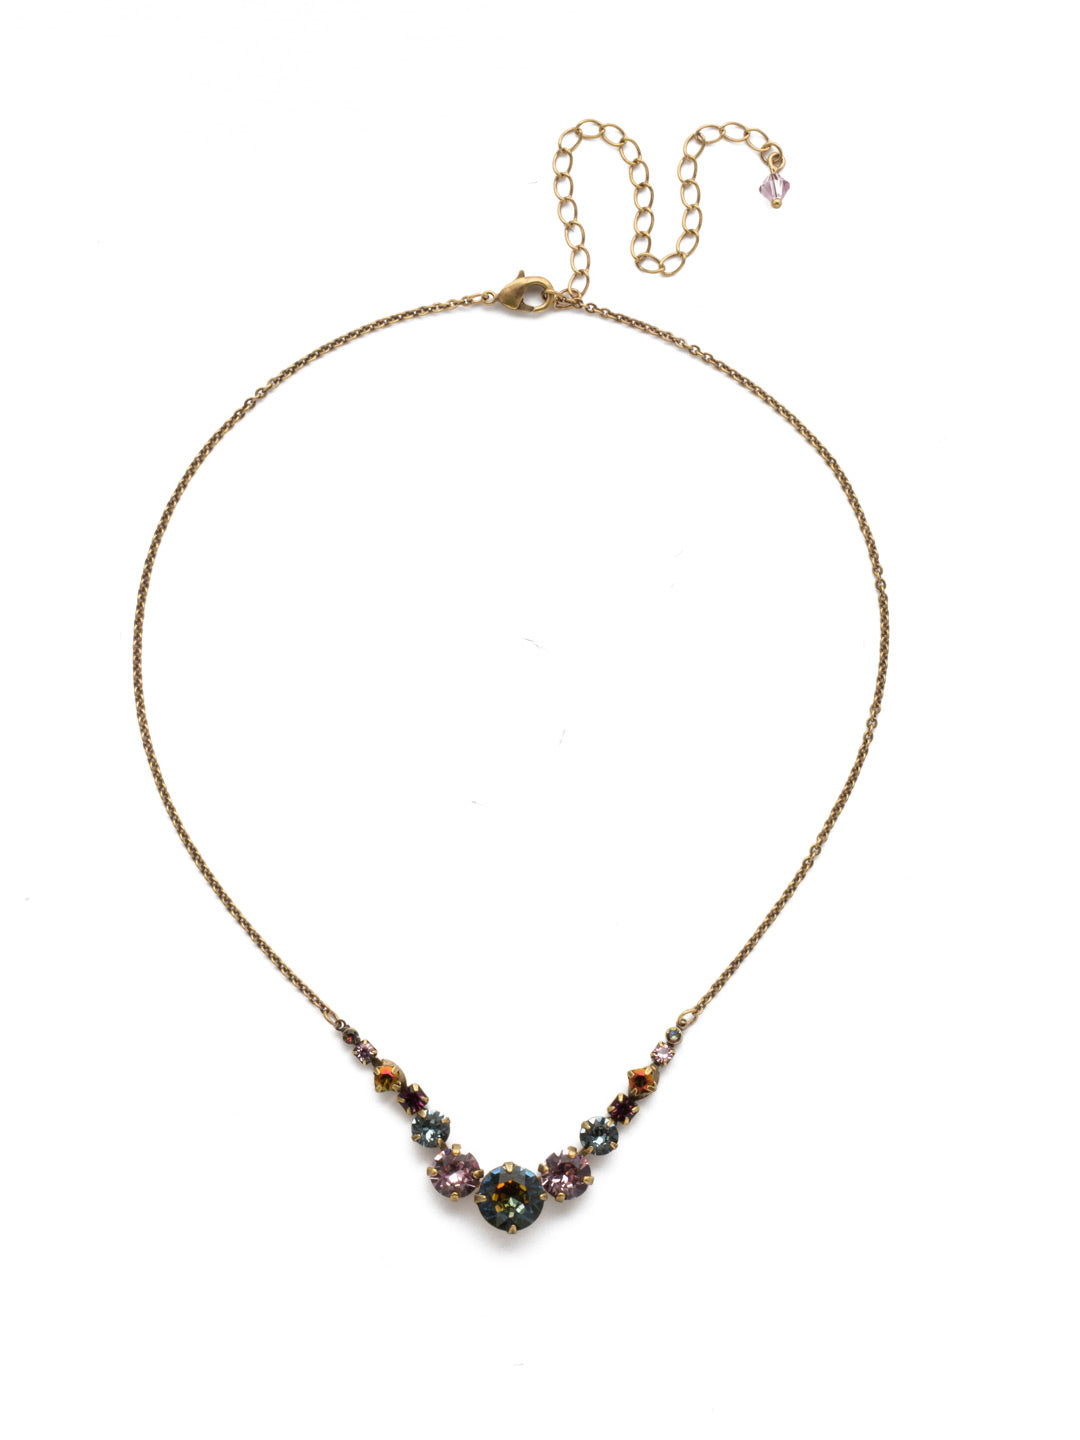 London Tennis Necklace - NCQ14AGROP - A long, simple chain paired with gorgeous round stones is exactly what every girl needs to dress things up. This round stone necklace is perfect for layering, or to just wear alone. Let the simple sparkle take over. From Sorrelli's Royal Plum collection in our Antique Gold-tone finish.